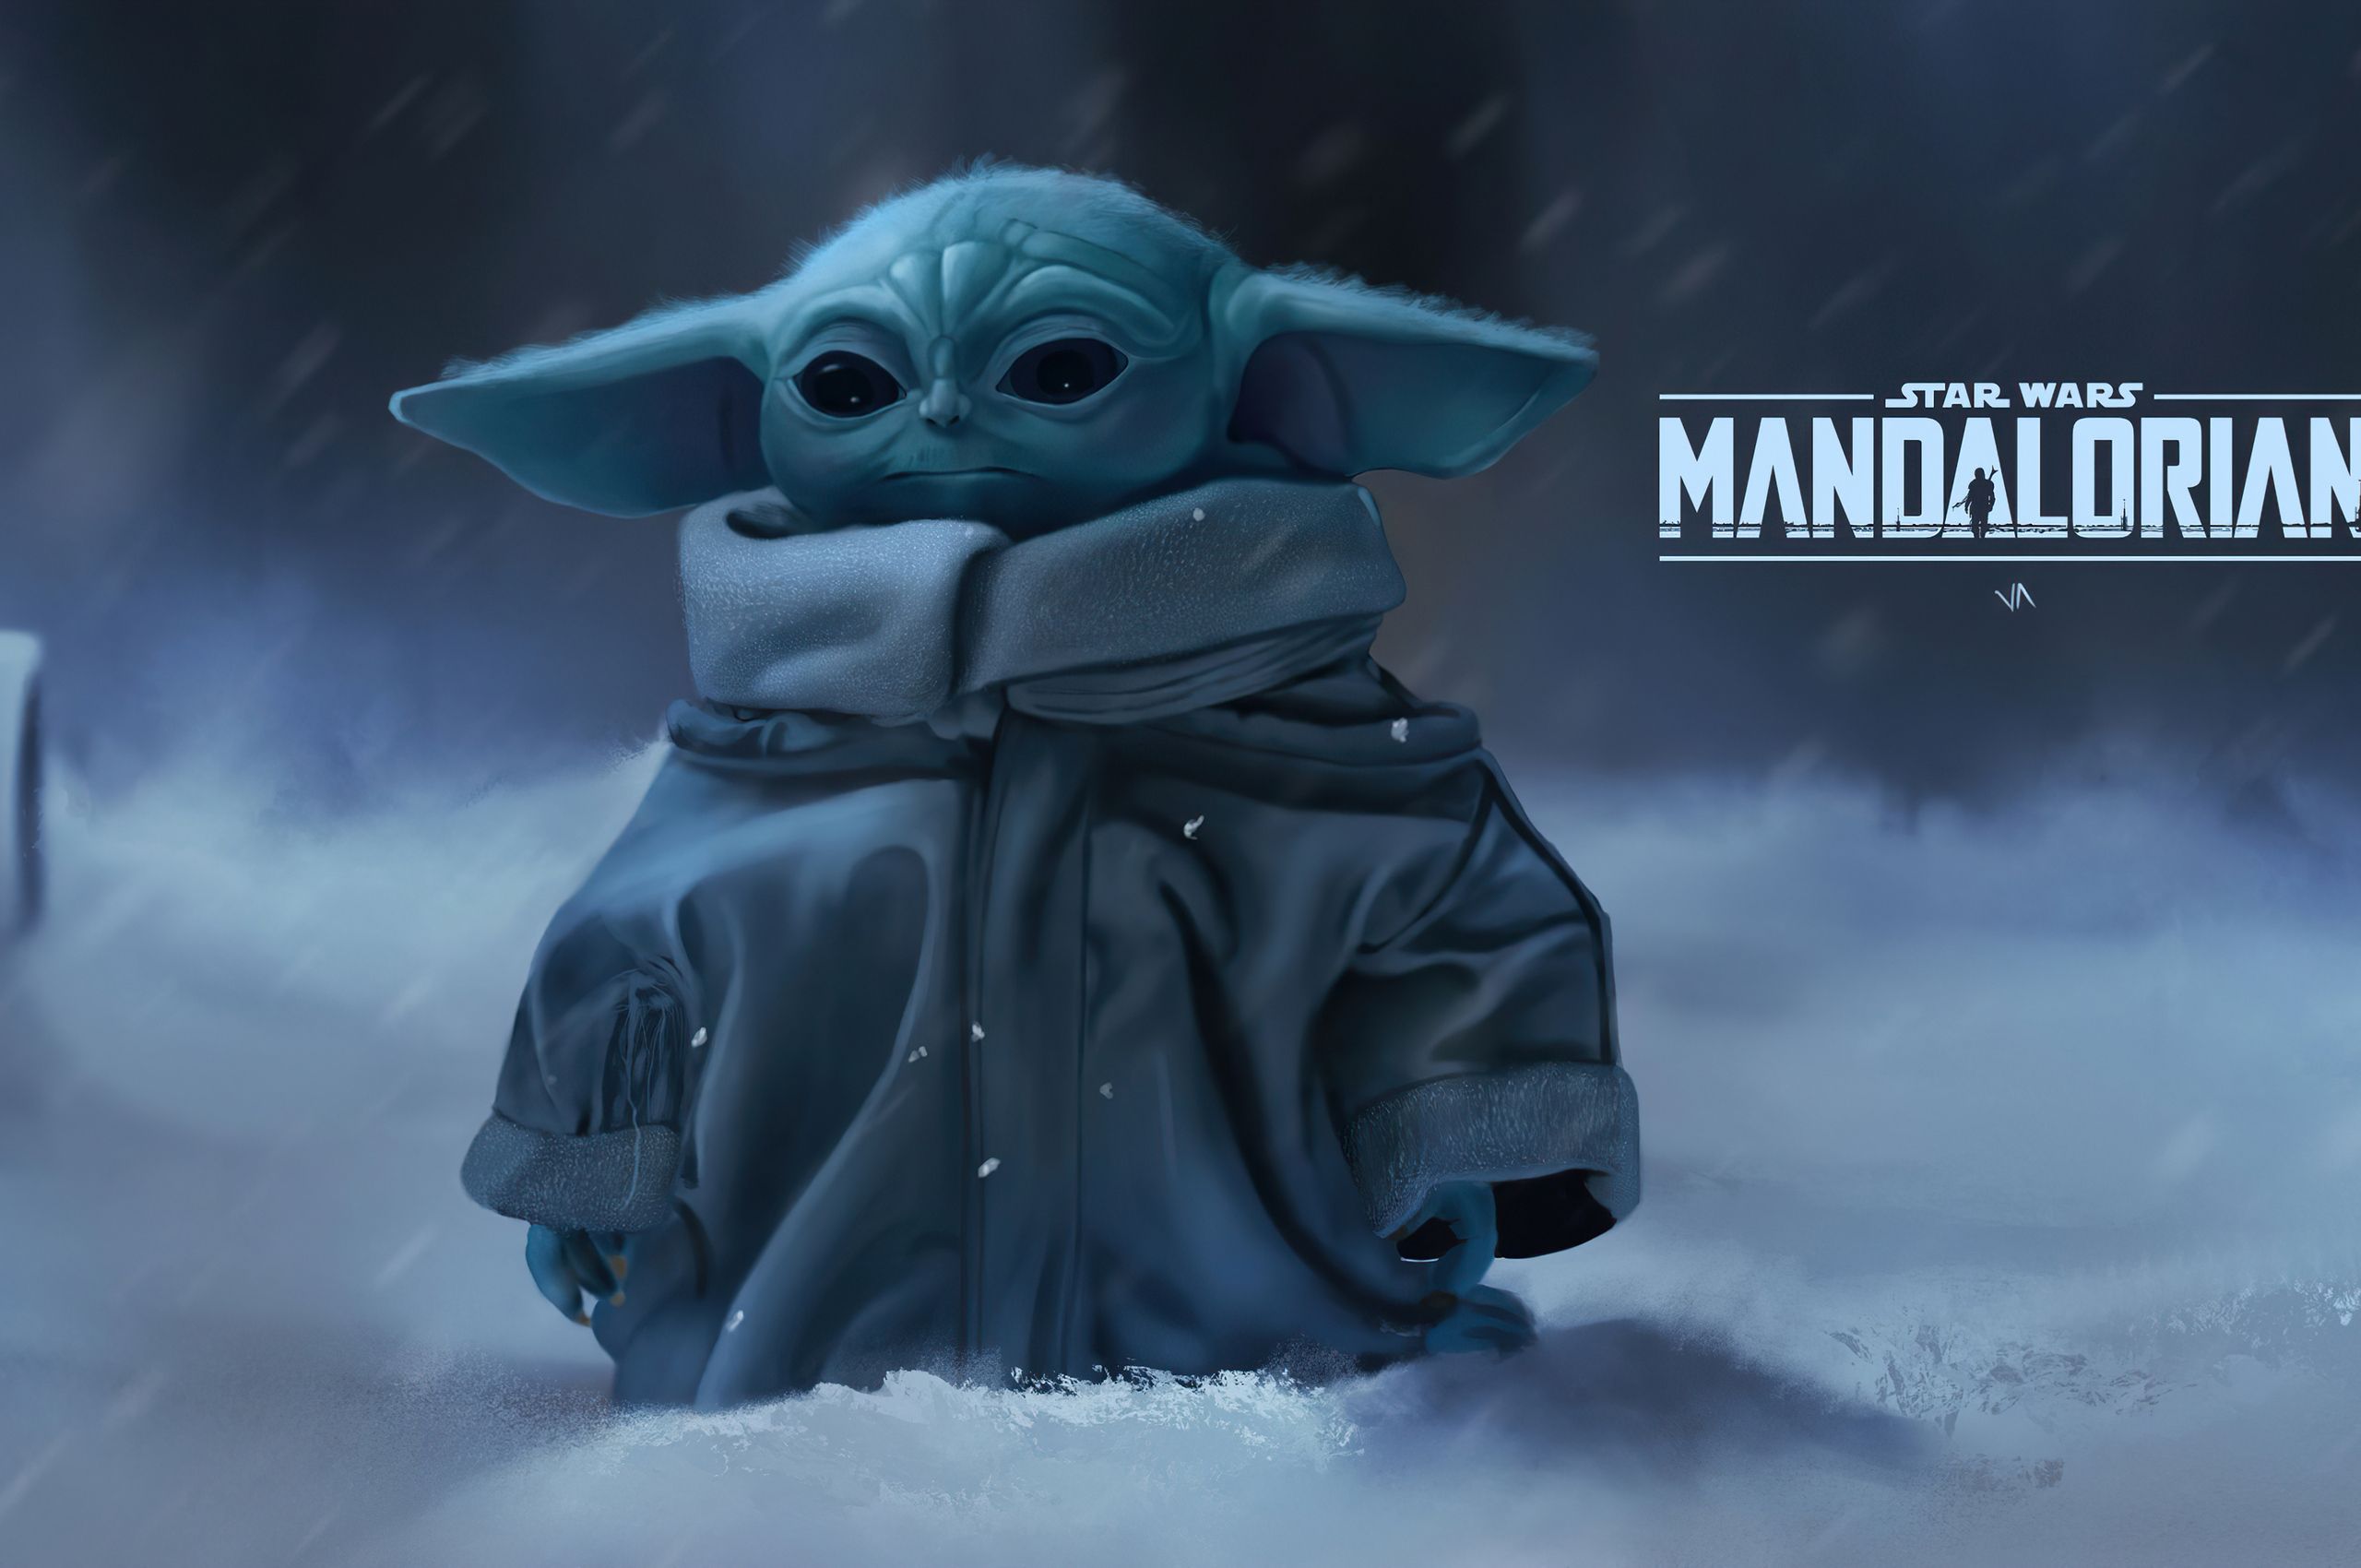 The Child from The Mandalorian in the snow - Baby Yoda